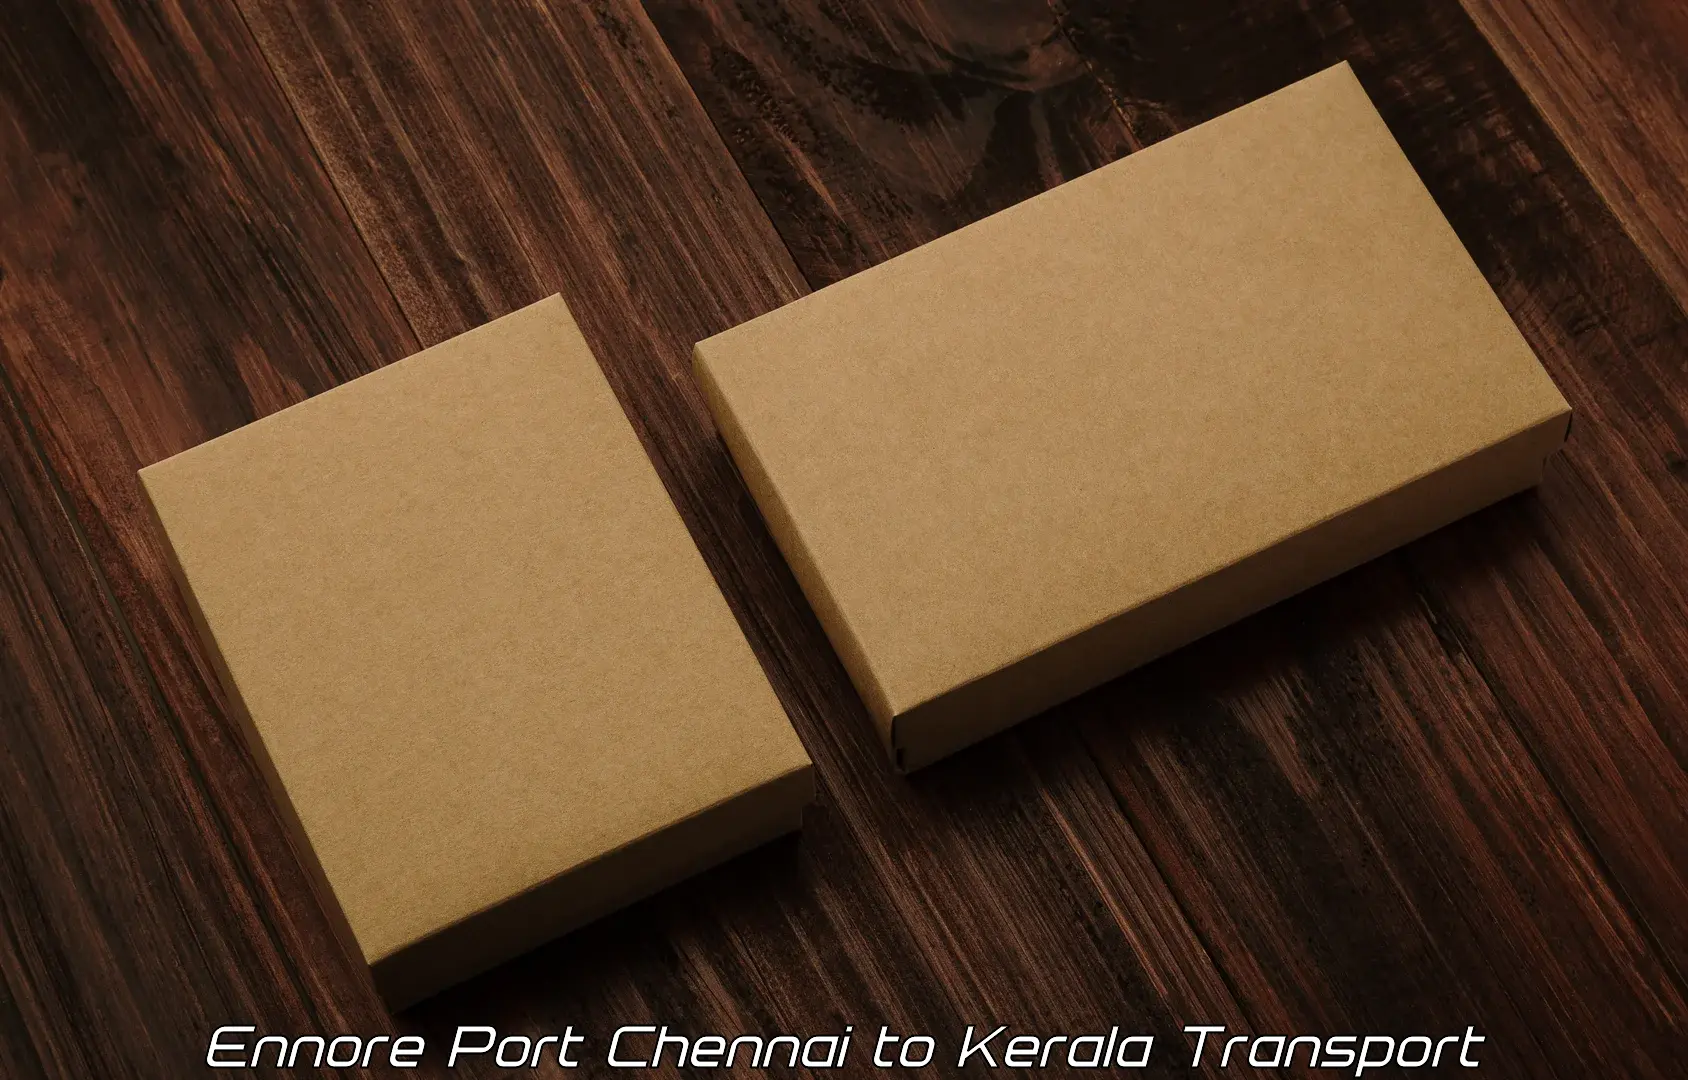 Nearby transport service Ennore Port Chennai to Perinthalmanna